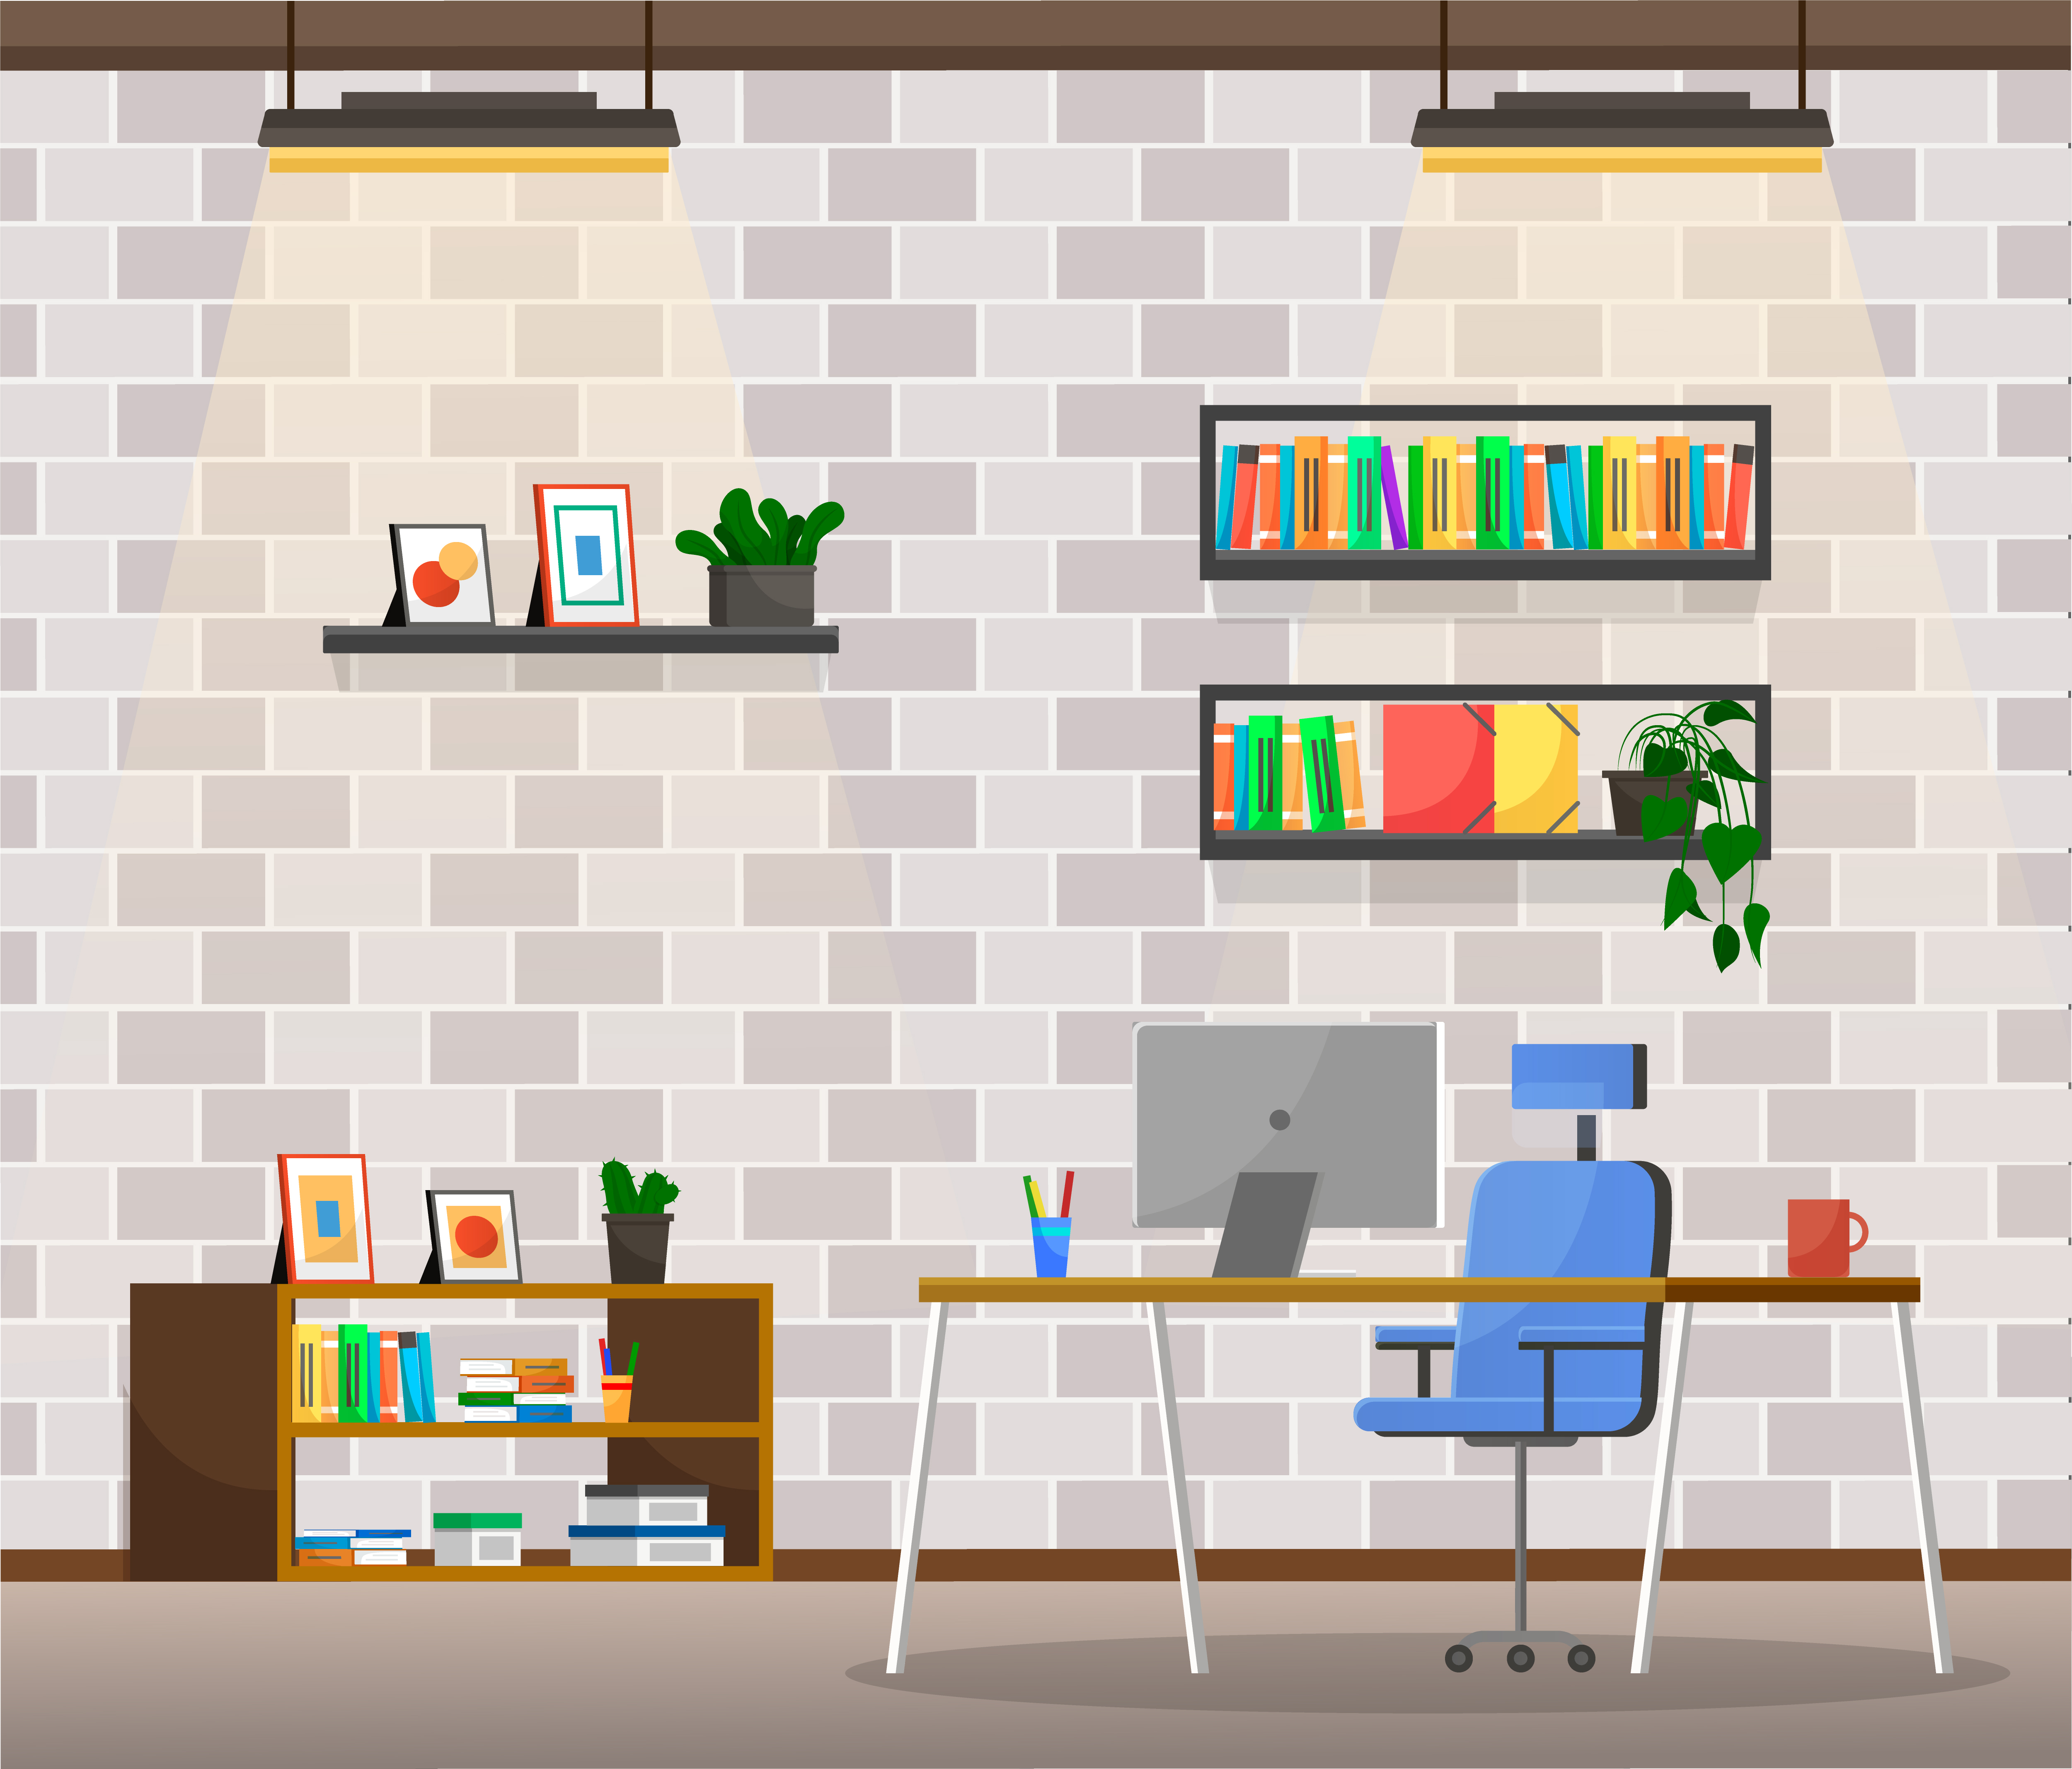 Office of boss or director. Working space of ceo executive of company. Table with personal computer and cup of coffee. Shelves with books and documents or files. Interior vector in flat style. Office Interior, Room of Director with Furniture